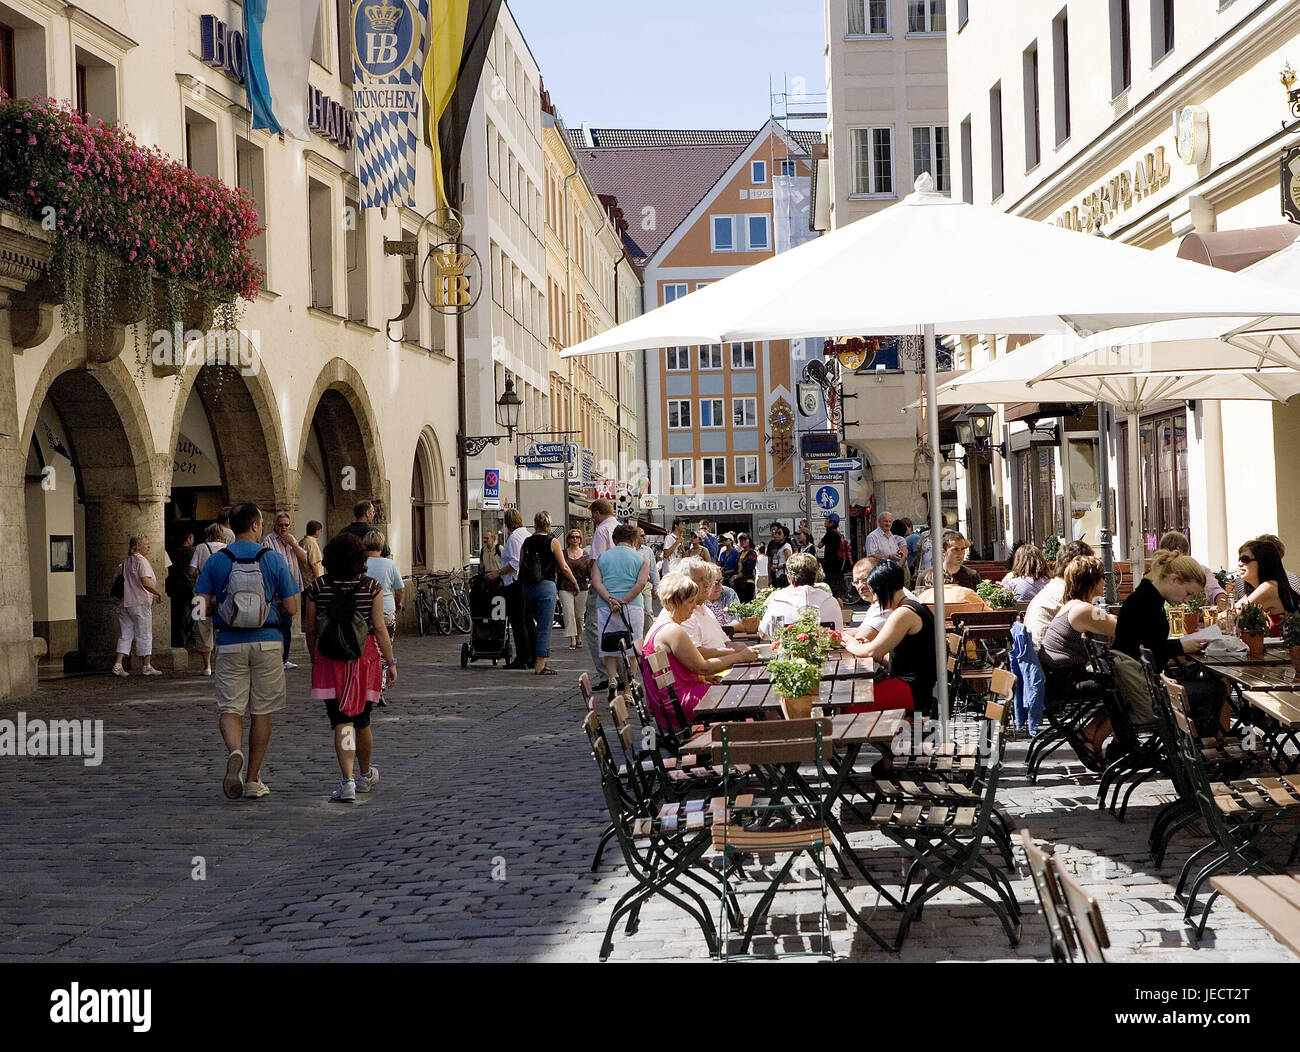 Germany, Upper Bavaria, Munich, Platzl, street bar, Hofbräuhaus, passer-by, Bavaria, pedestrian area, bars, cafes, buildings, restaurants, tourist attraction, attraction, place of interest, gastronomy, economy, tourism, person, sunshade, summer, outside, Stock Photo